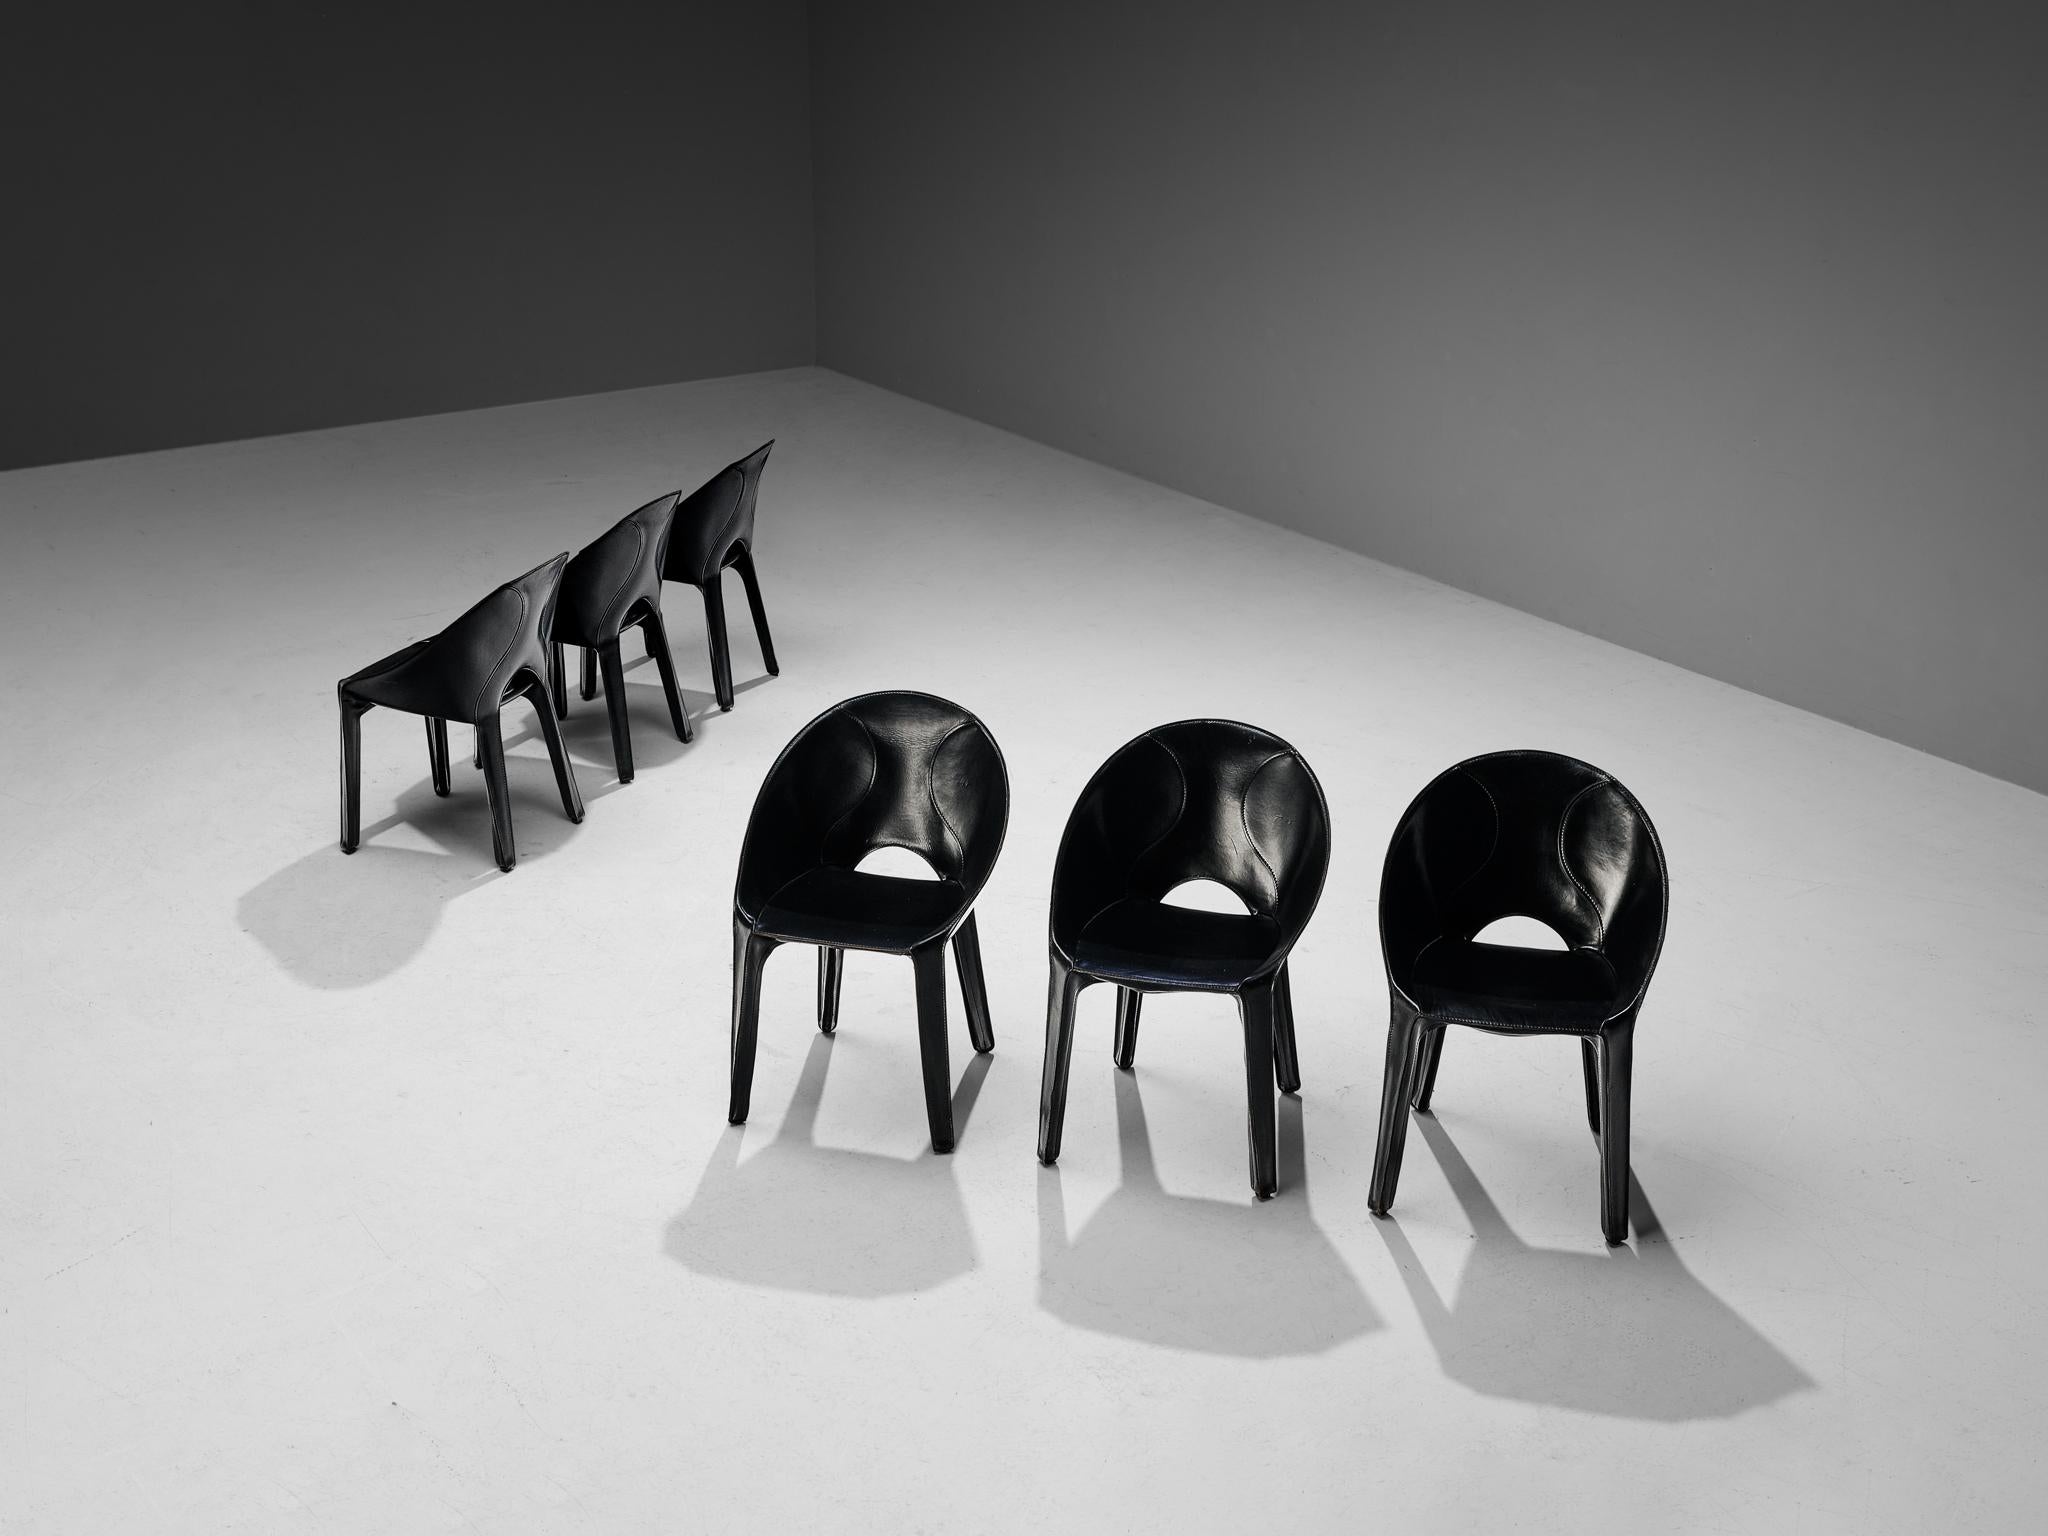 Mario Bellini for Cassina, set of six ‘Lira e Liuto’ dining chairs, black leather, Italy, 1989

This postmodern set of six ‘Lira e Liuto’ dining chairs is executed in black leather that is stitched to the seat. The four legs and the rounded seat are